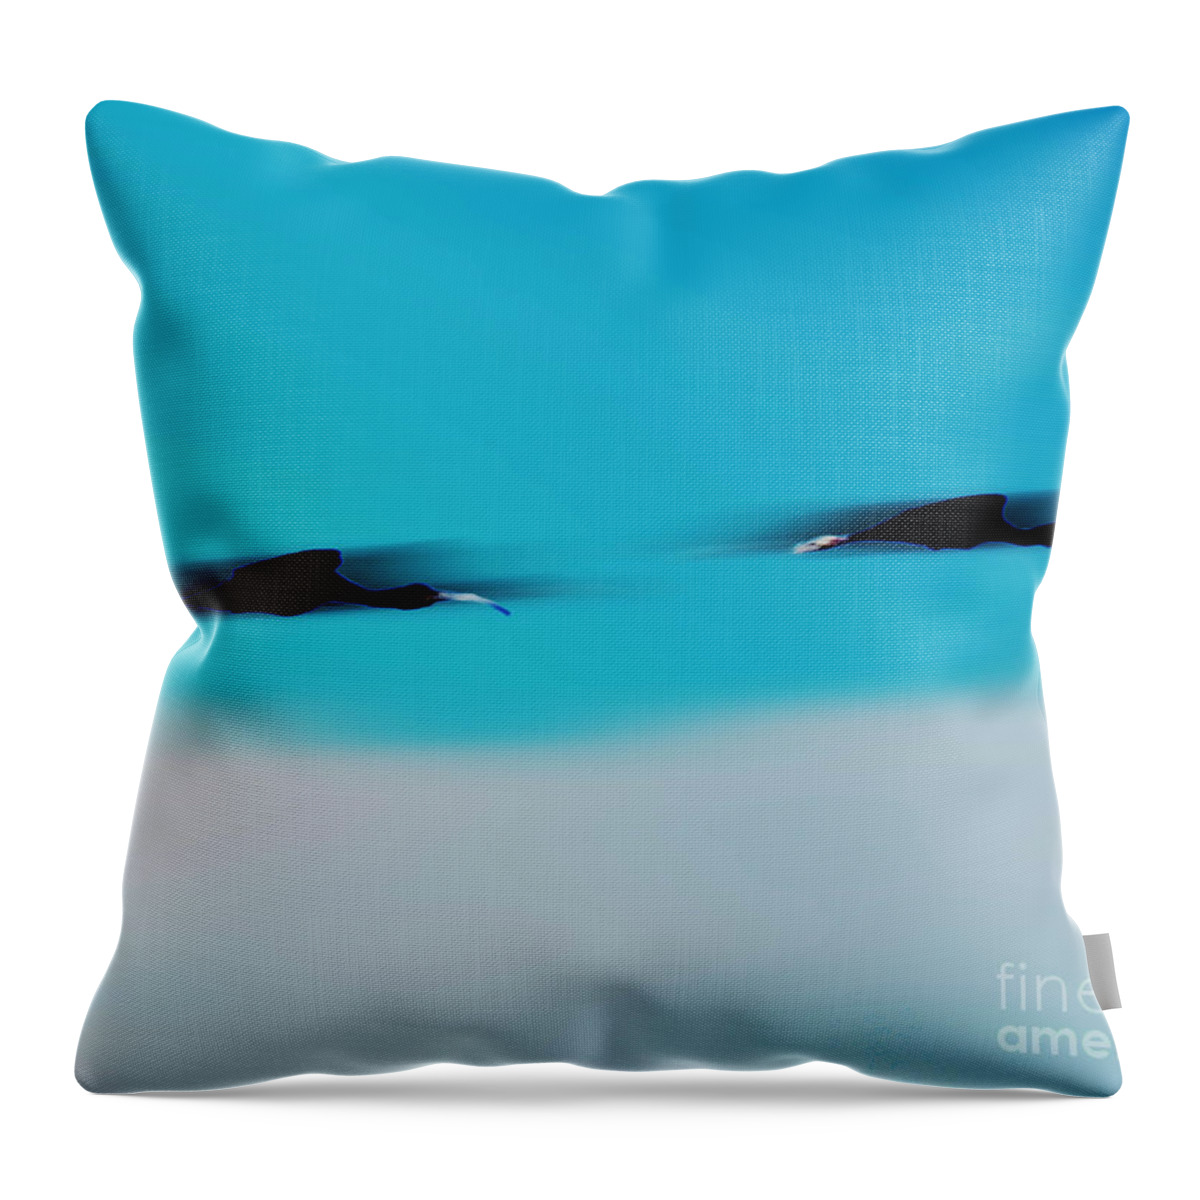 Fly Throw Pillow featuring the digital art FlyBy by Lizi Beard-Ward